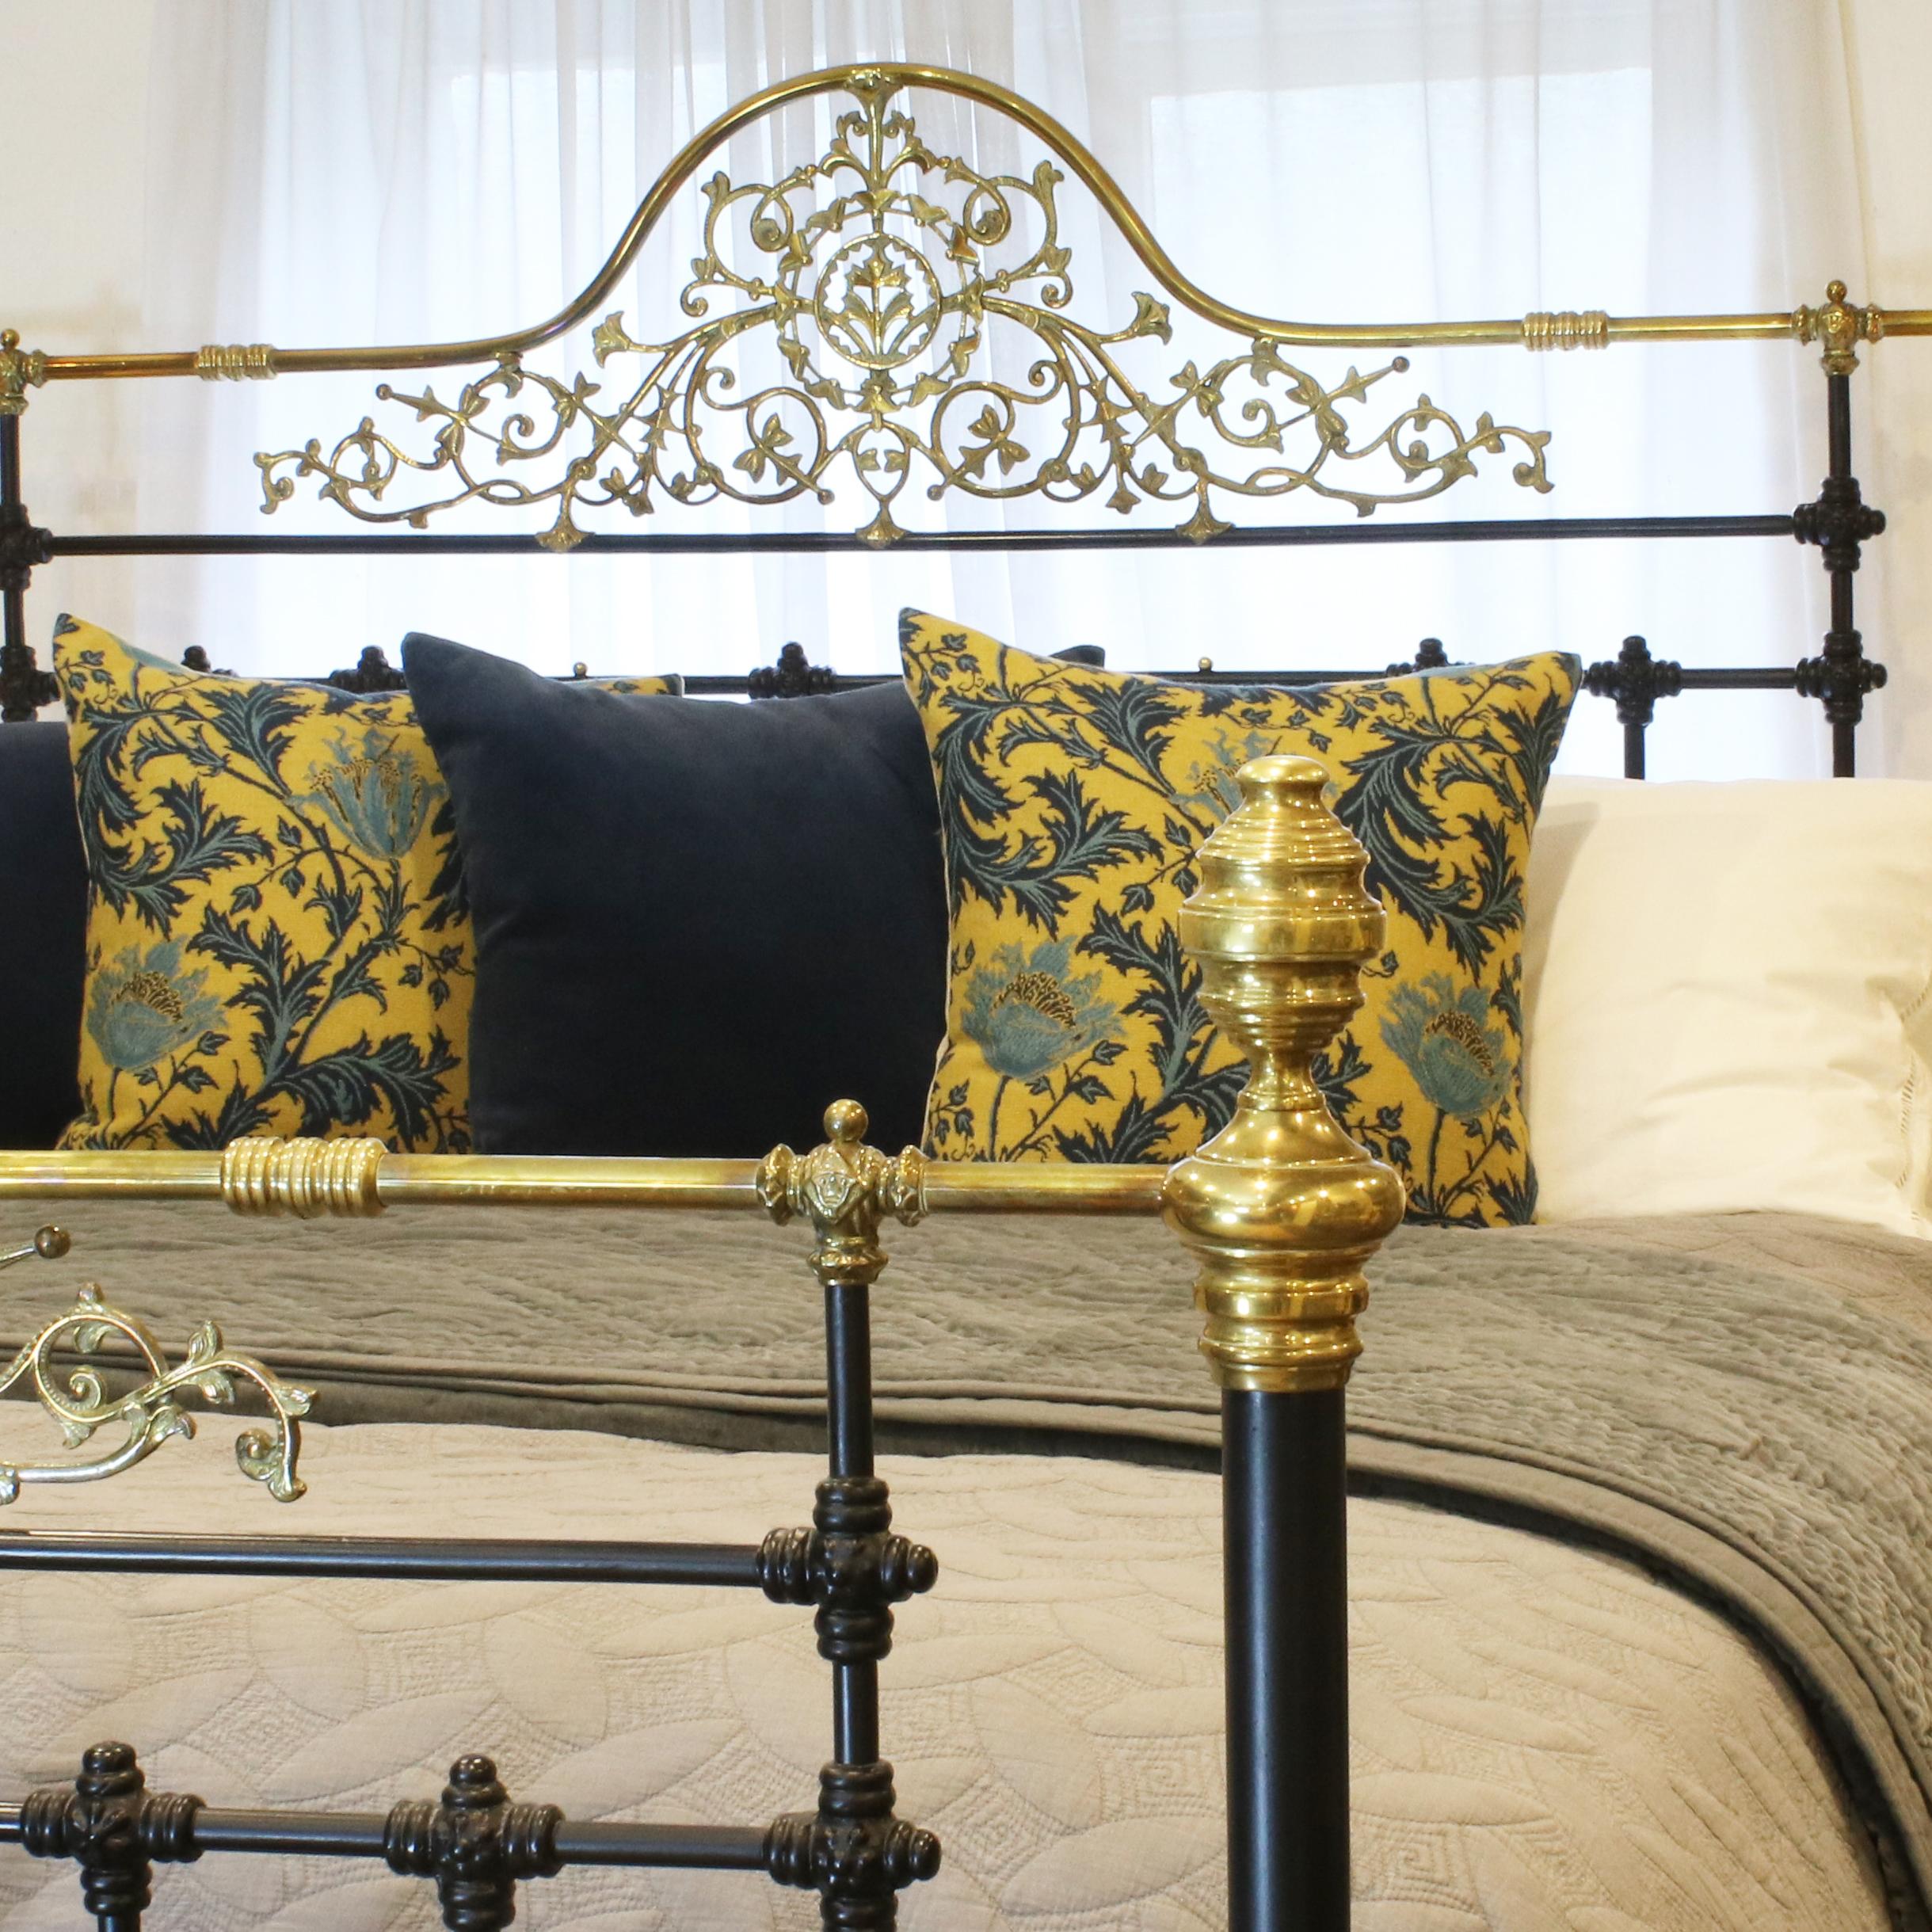 Magnificent mid-Victorian cast iron bed, with superbly cast brass plaques in head and foot panels.

This bed accepts a British Super King Size or Californian King Size (6ft wide, 72 inches or 180cm) base and mattress.

The price is for the bed frame